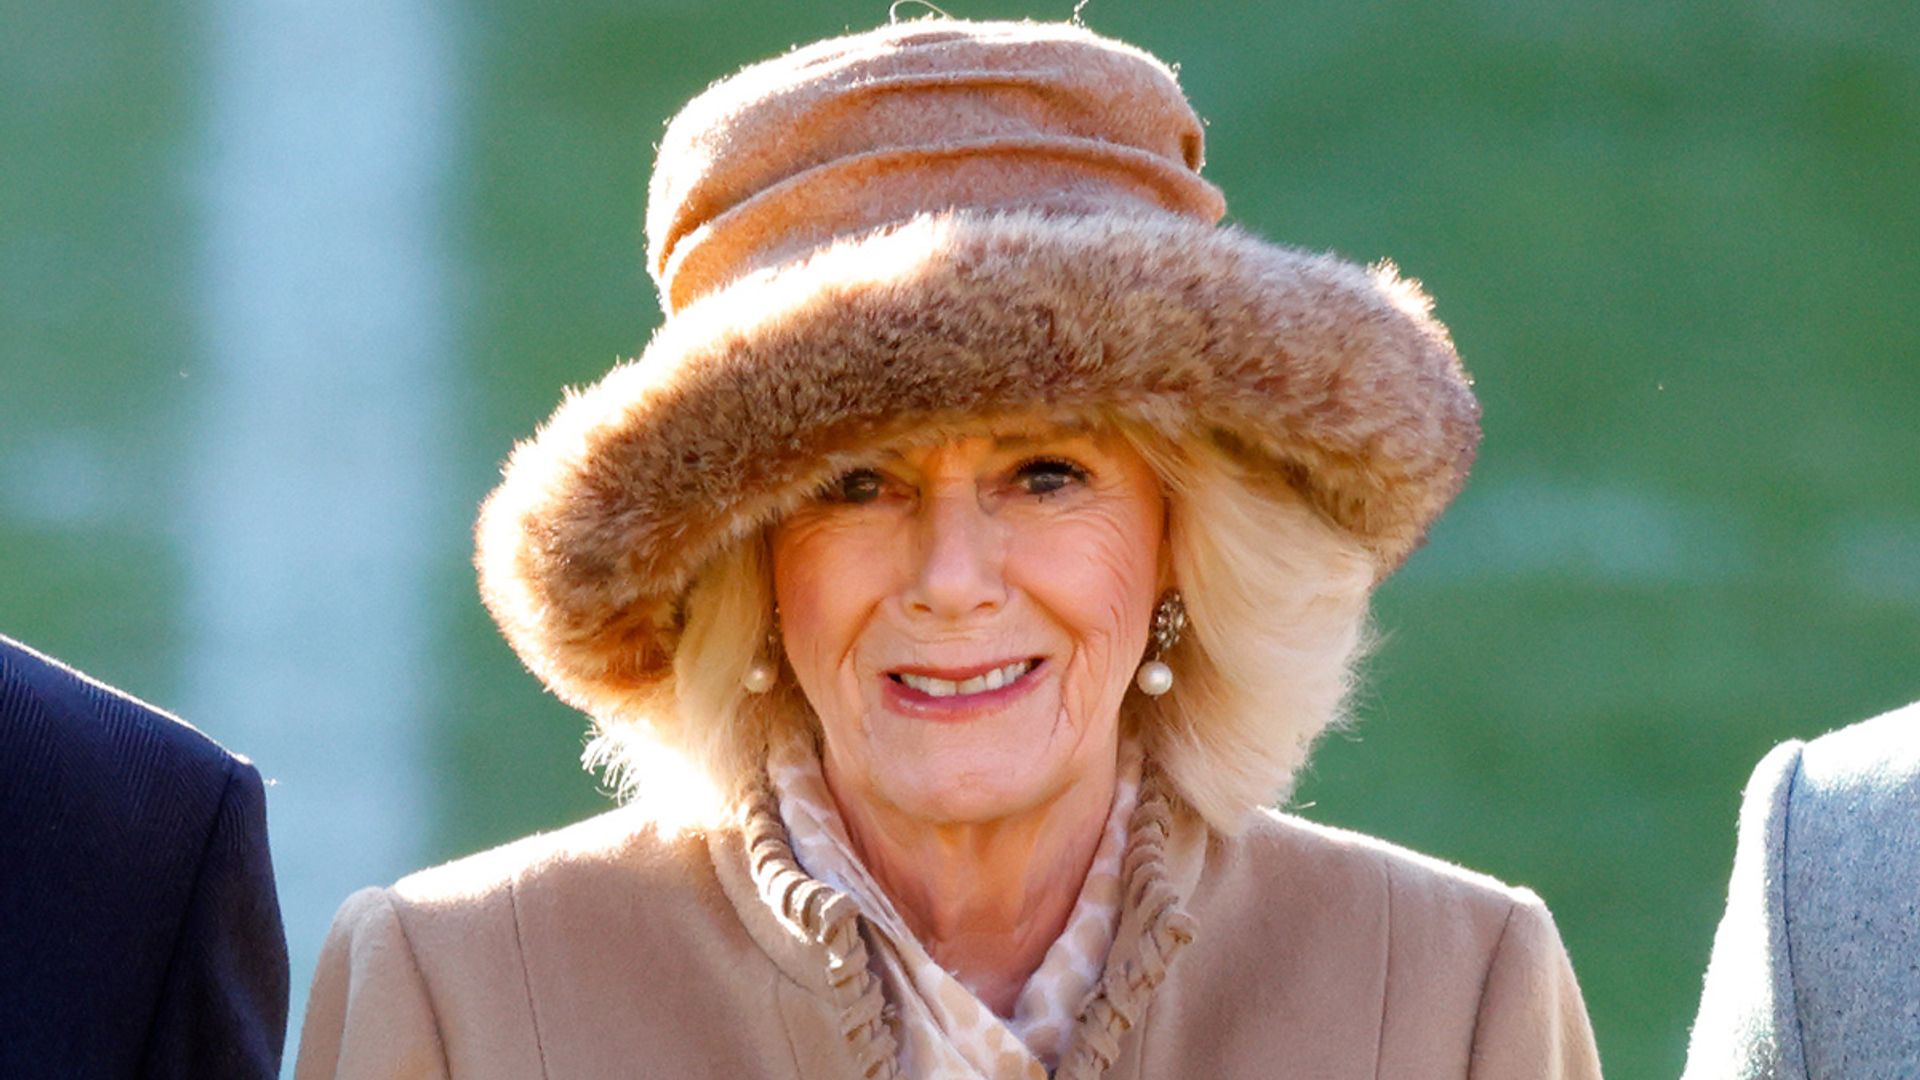 Queen Consort Camilla dons sparkling festive accessory for royal Christmas gathering